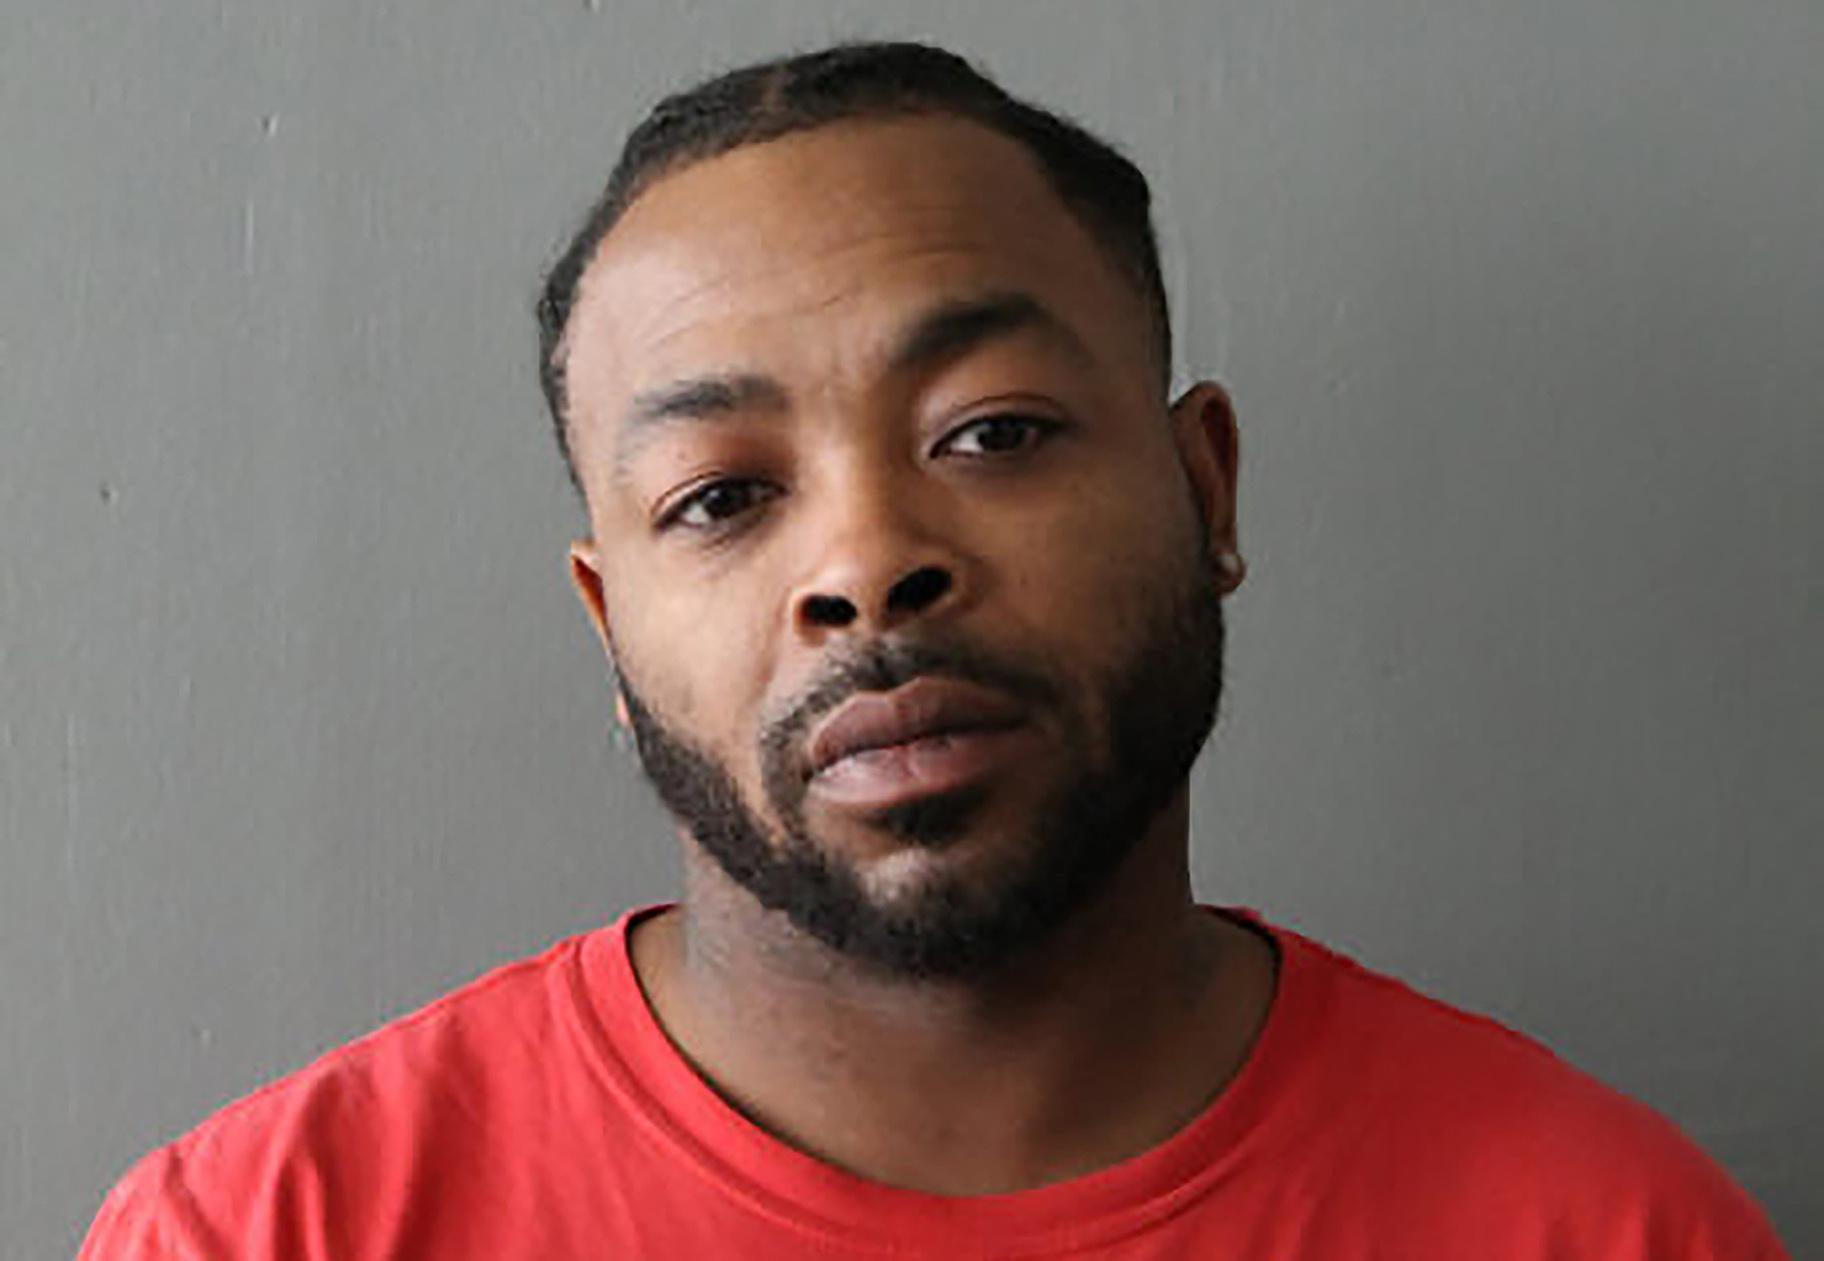 This undated photo provided by the Chicago Police Department shows Marciano White, who has been charged in connection with a shooting early Sunday, Dec. 22, 2019, at a house party that left 13 people wounded, four of them critically, Chicago police said.  (Chicago Police Department via AP)